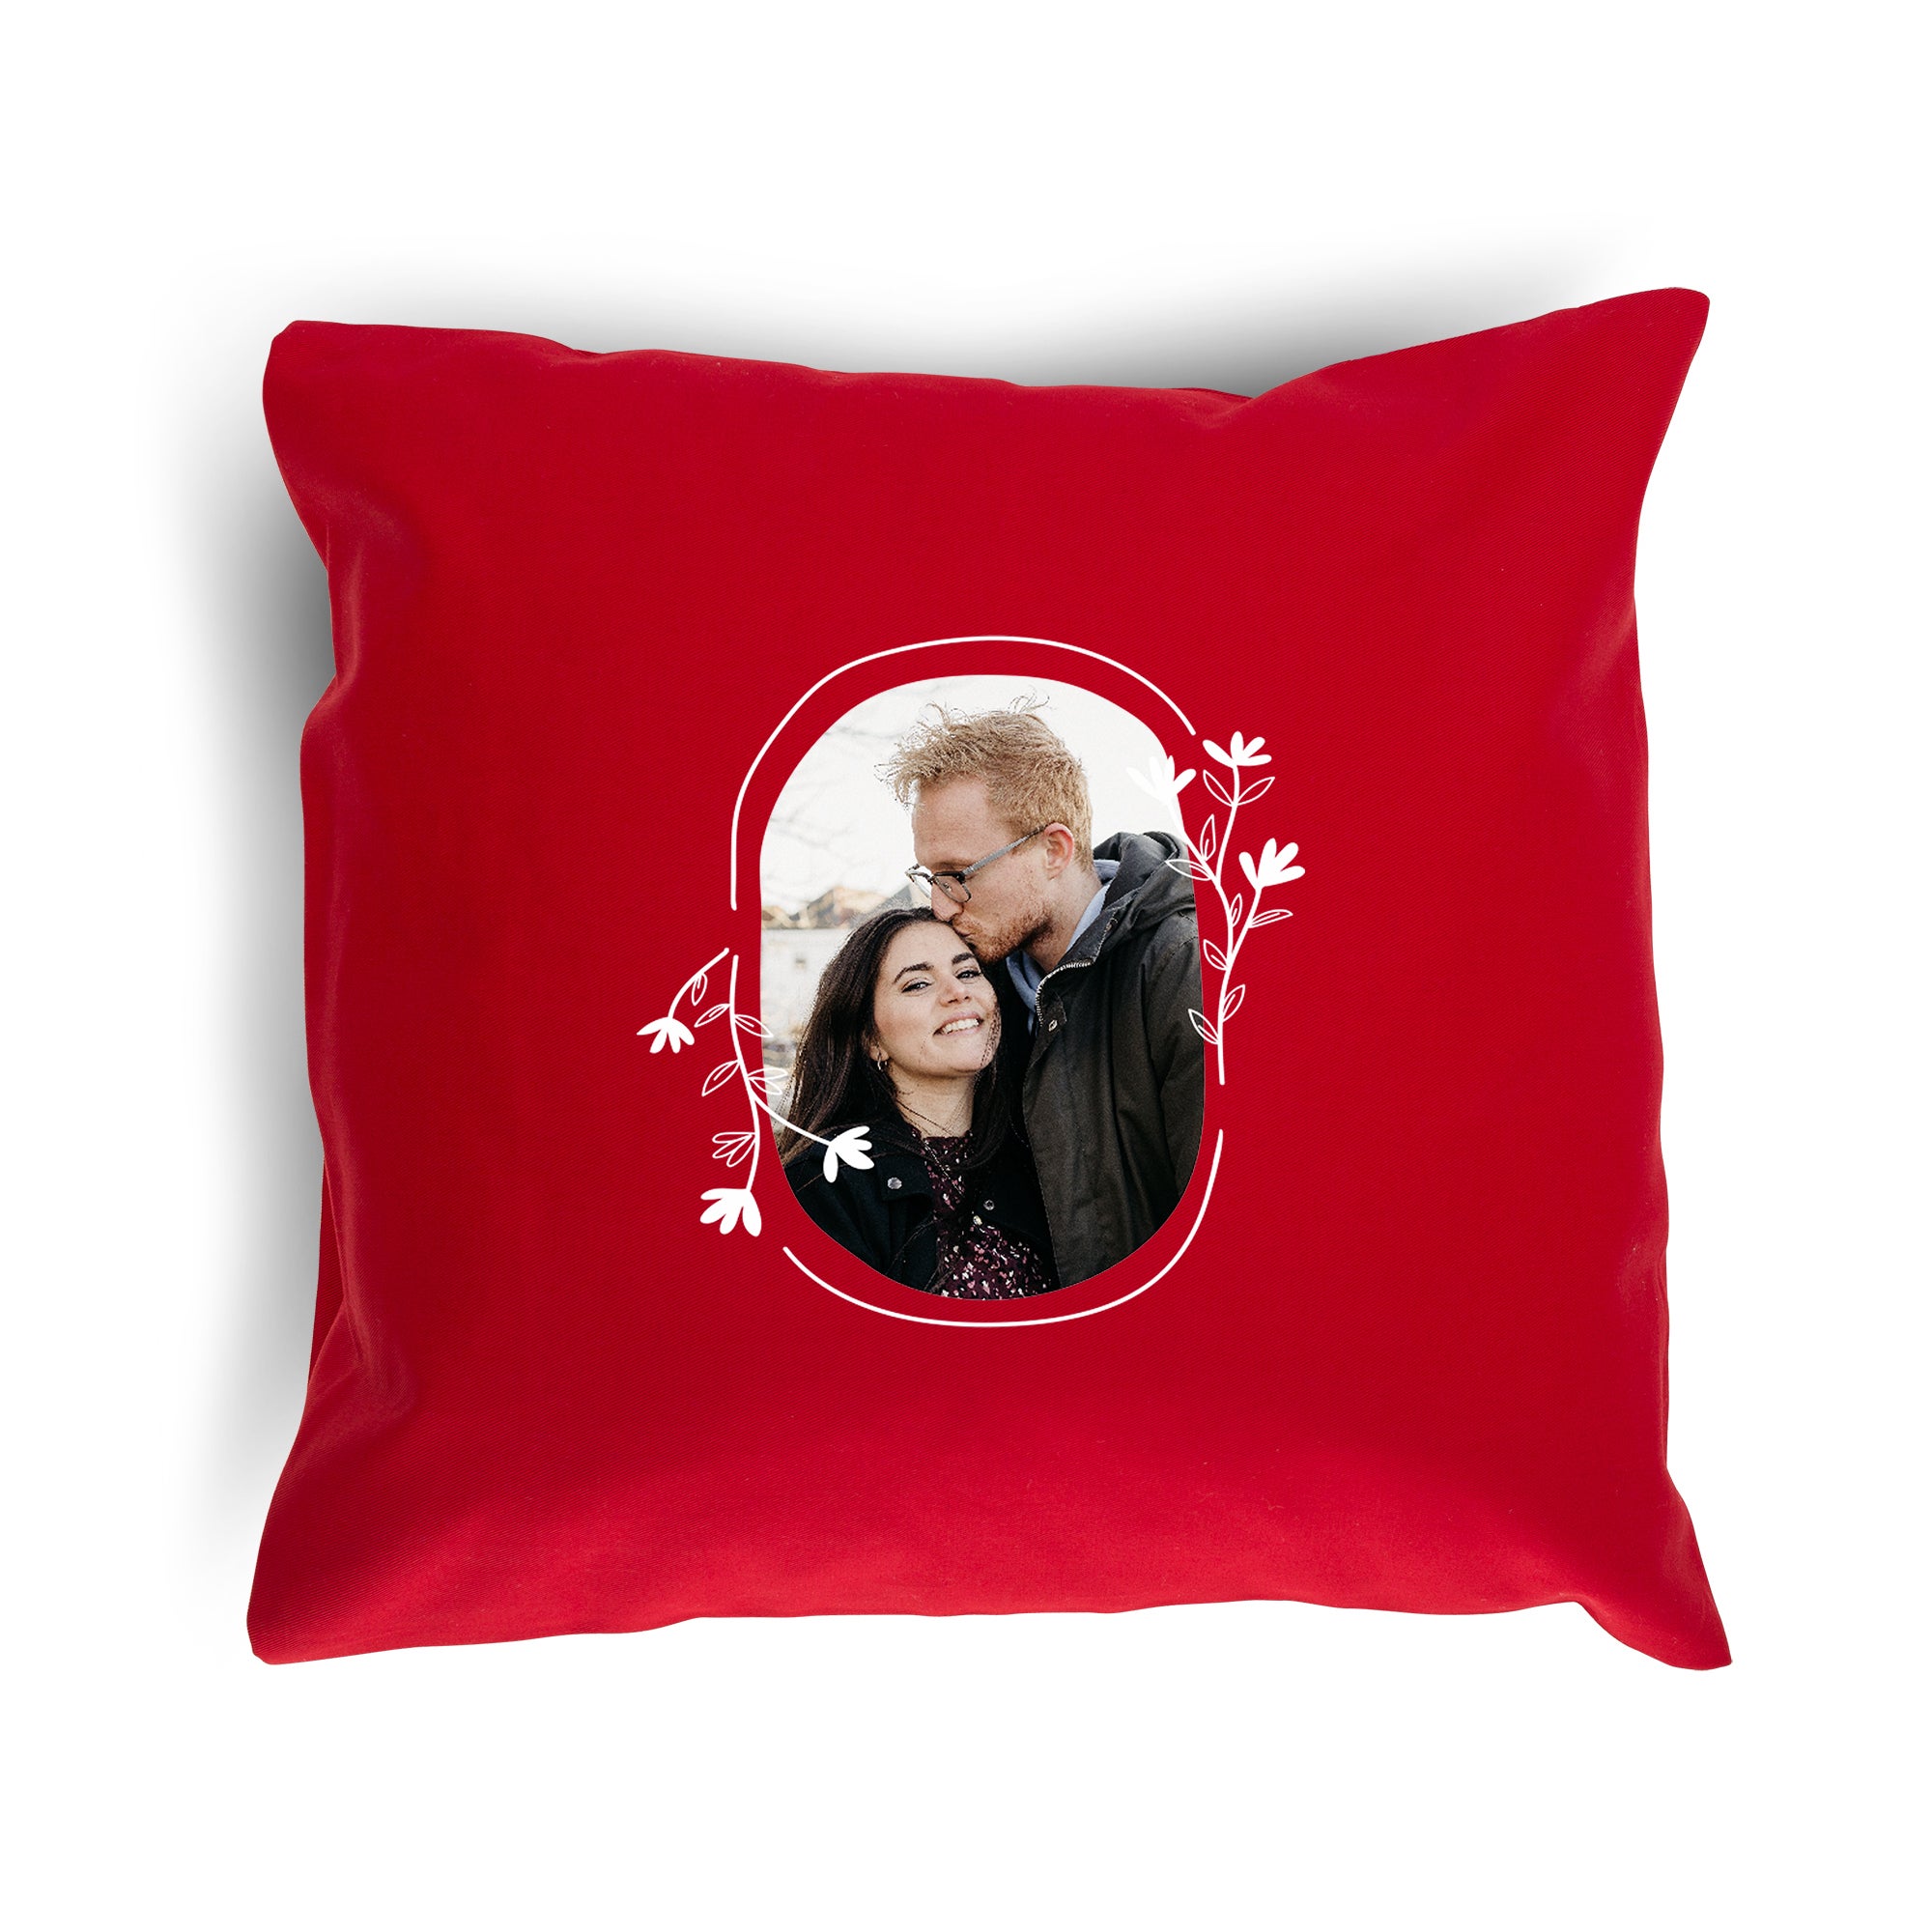 Personalised cushion case - Red - 40 x 40 cm